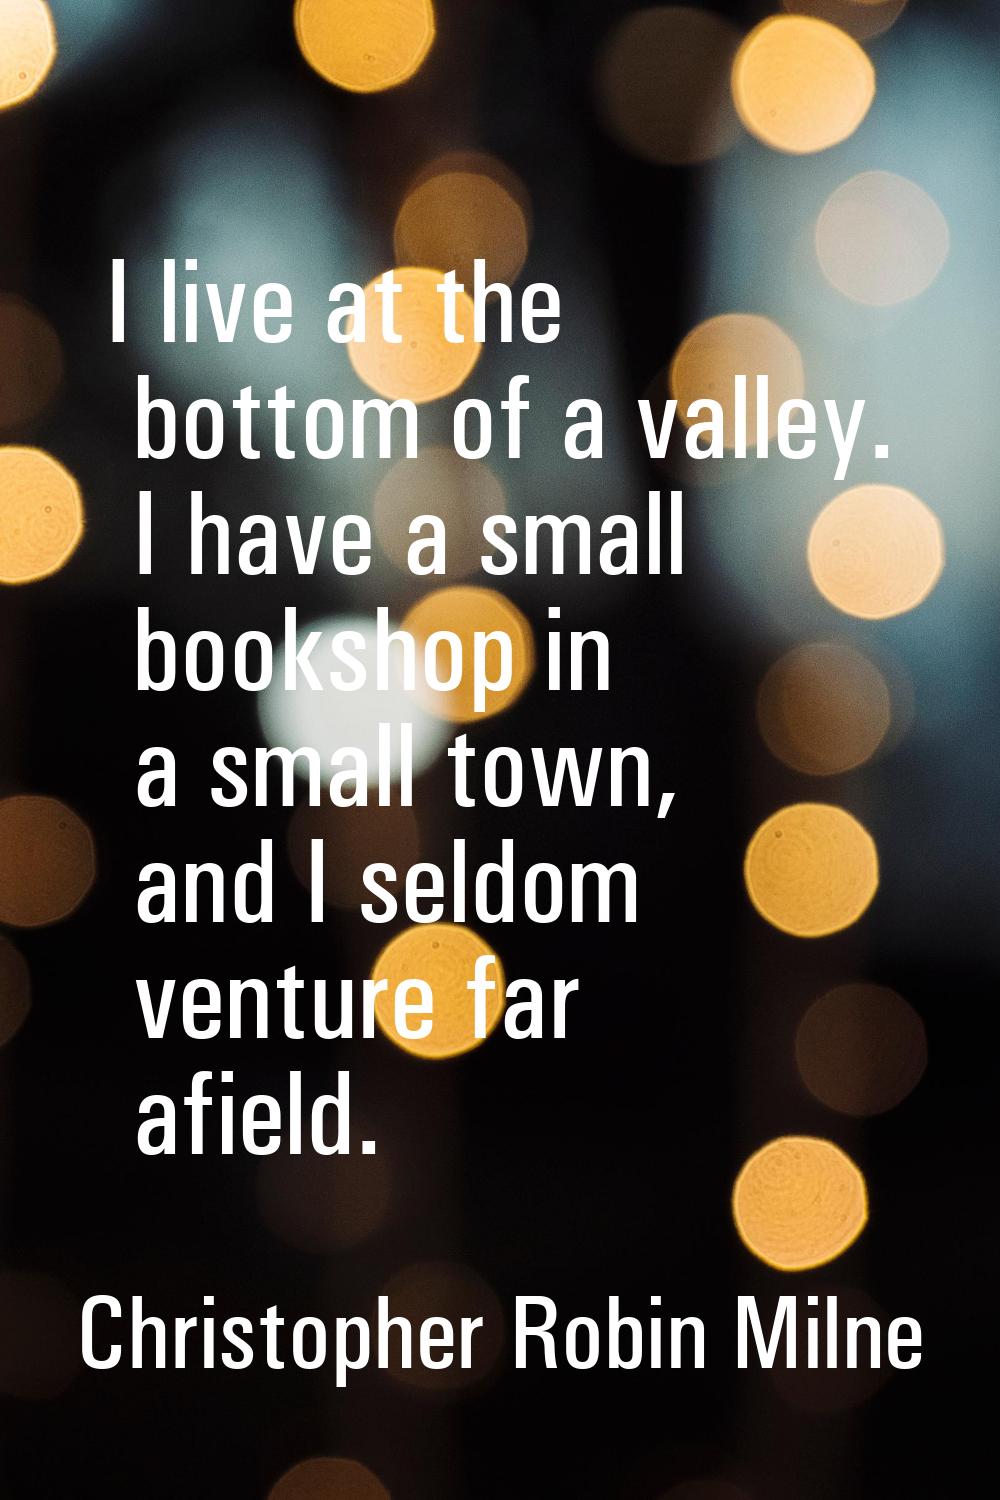 I live at the bottom of a valley. I have a small bookshop in a small town, and I seldom venture far